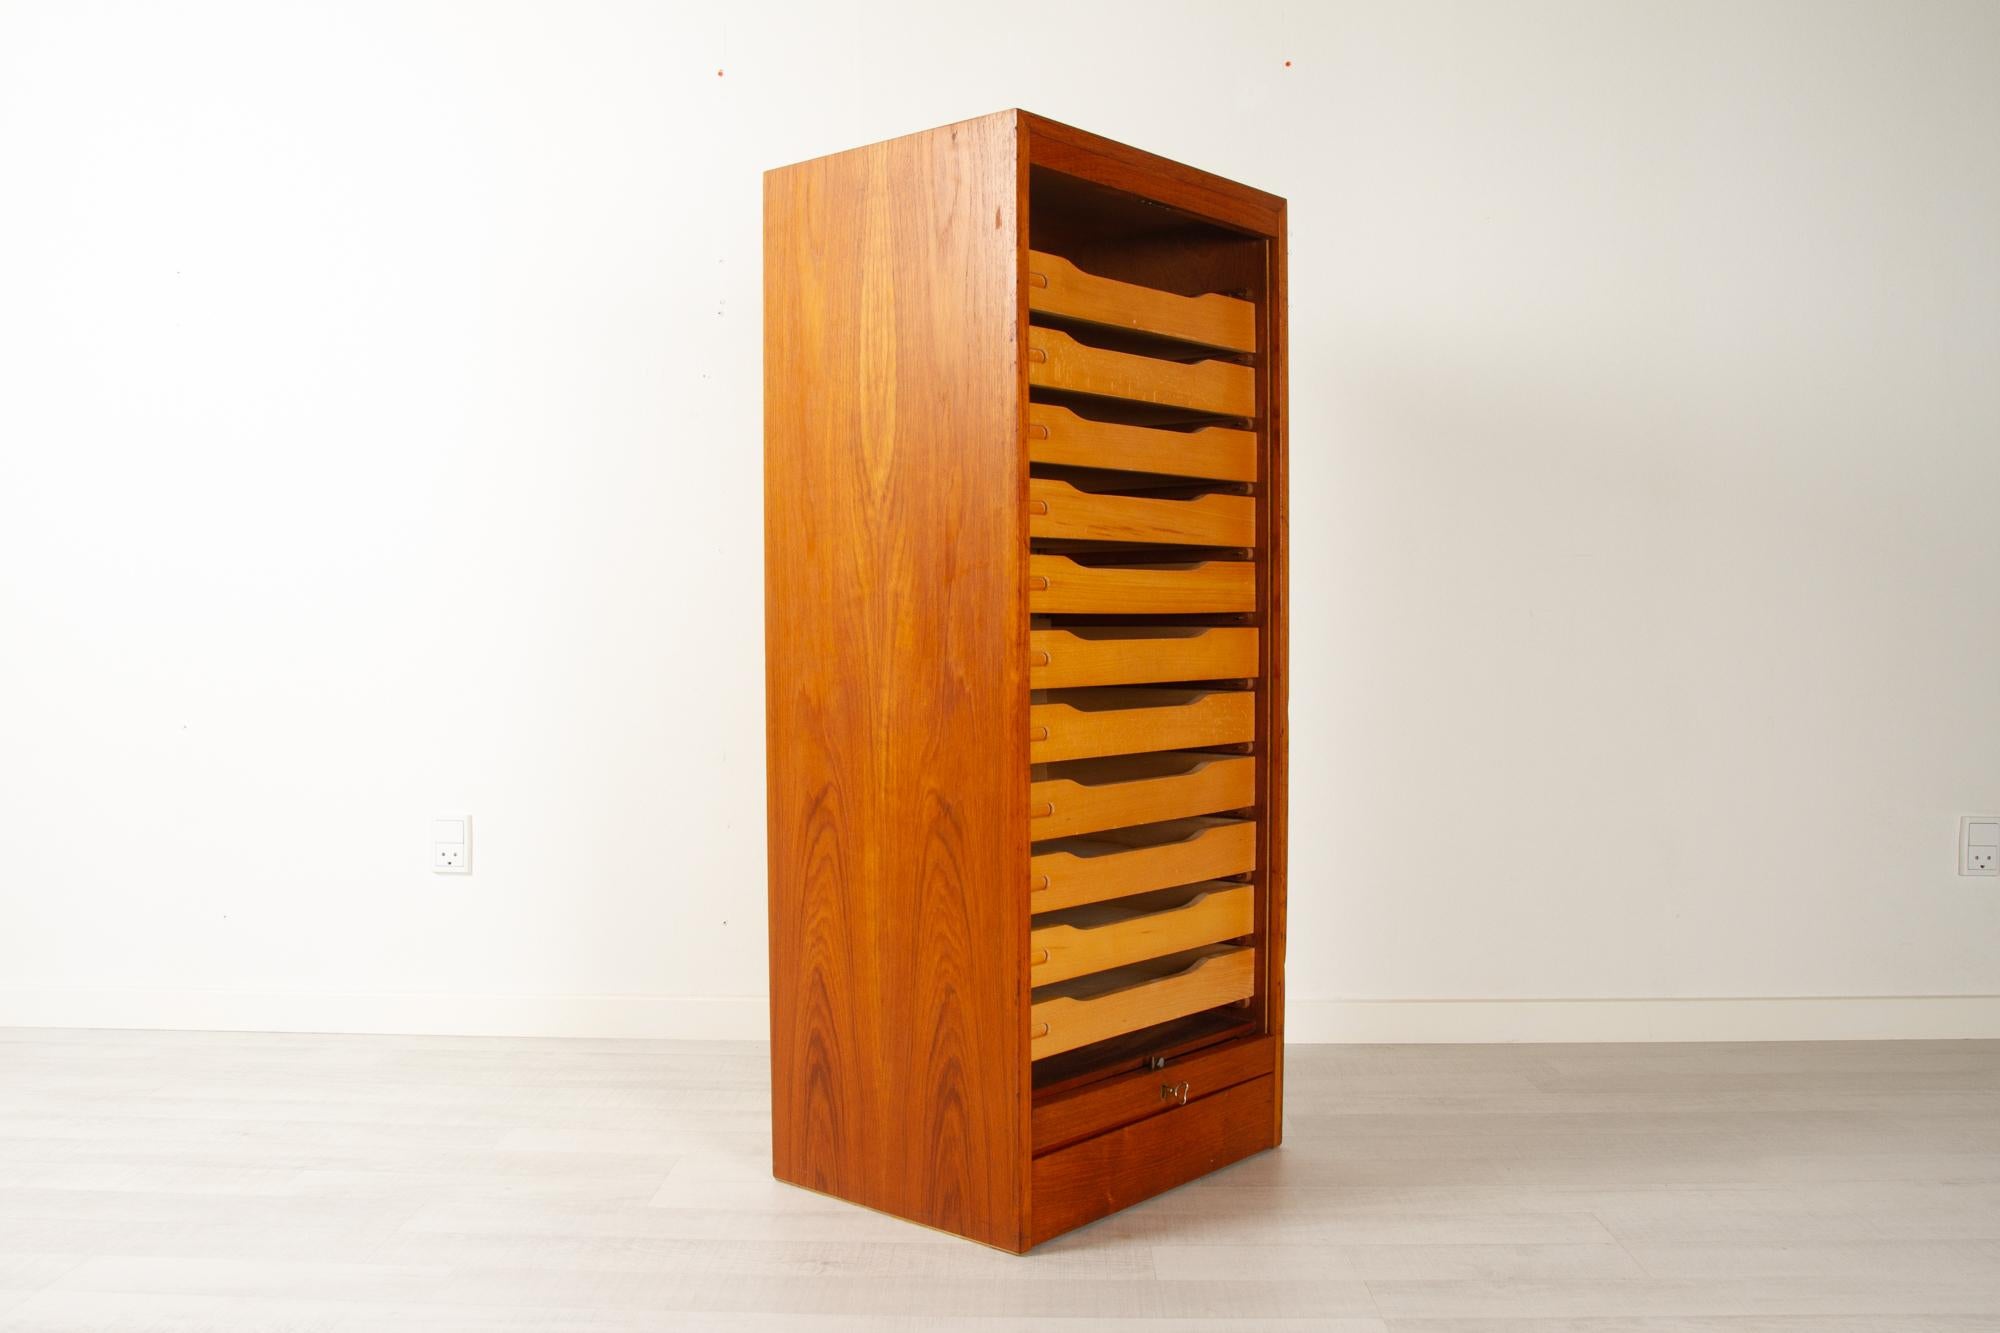 Vintage Danish teak cabinet with tambour front, 1960s
Danish modern filing cabinet with vertical sliding tambour door in teak. 11 wide drawers in solid beech. Rolling door opens with key. Key is included. The teak has a warm color and a vivid grain